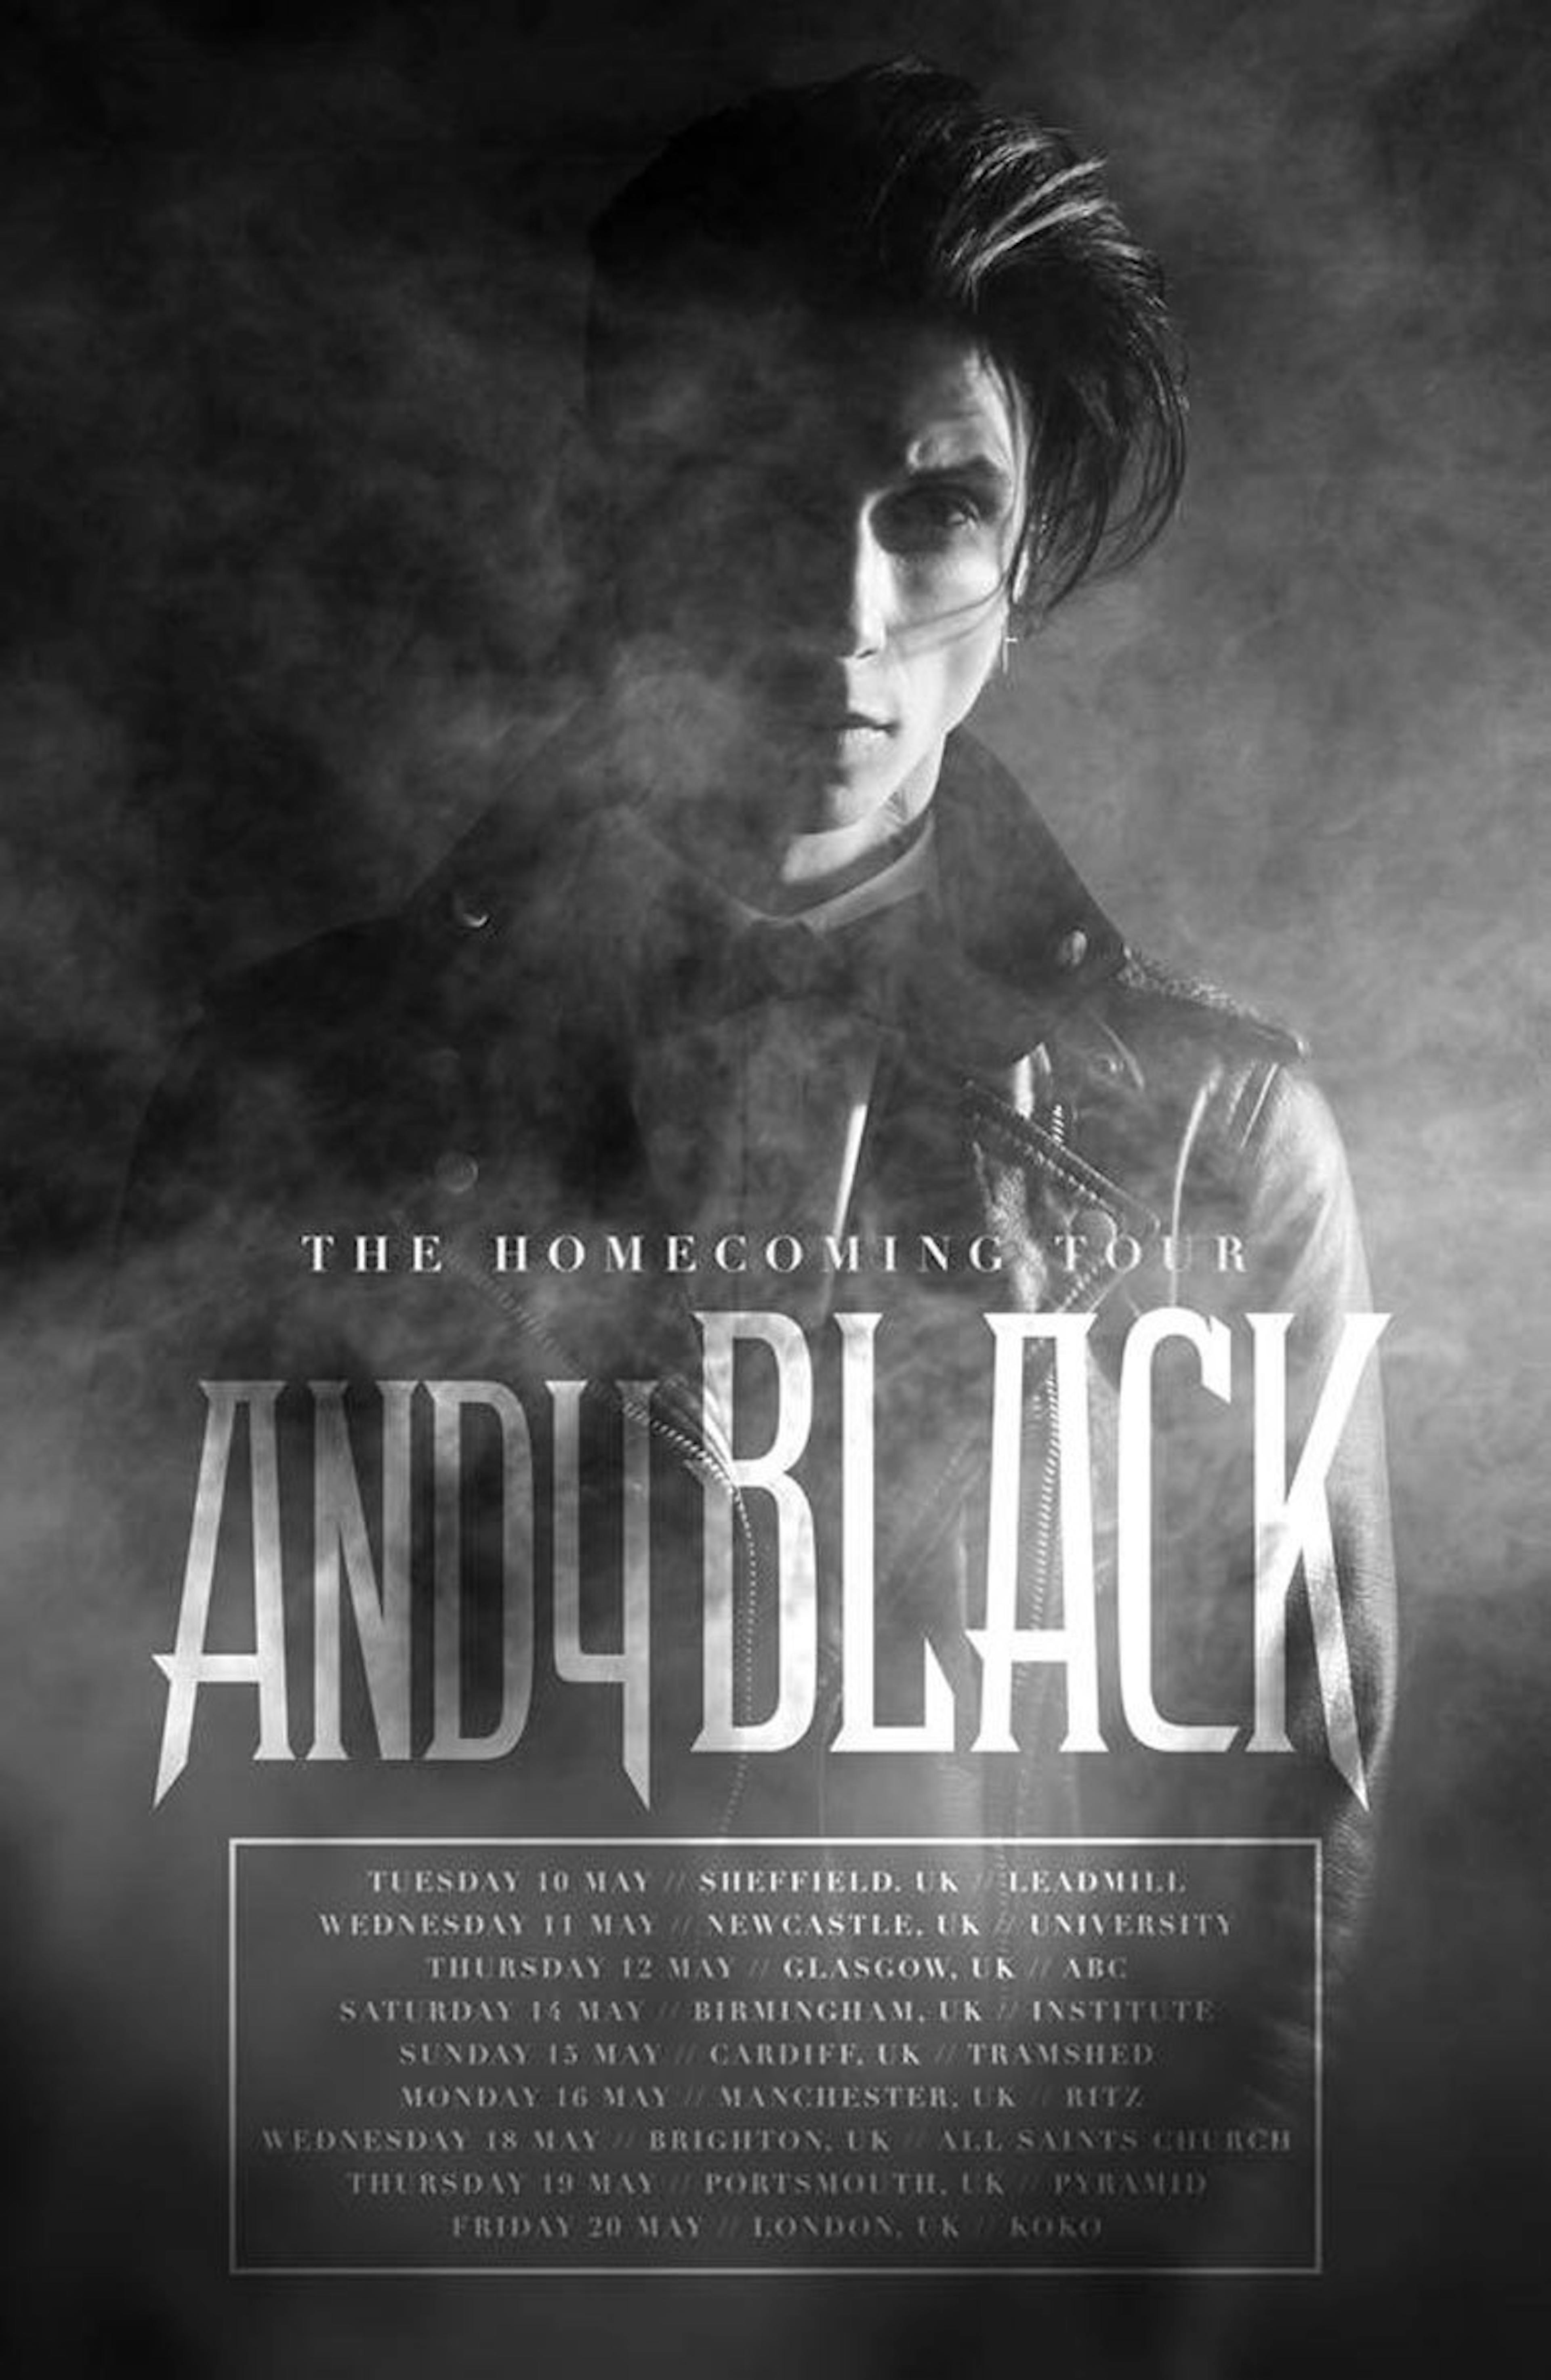 Andy Black Posts We Don’t Have To Dance Video